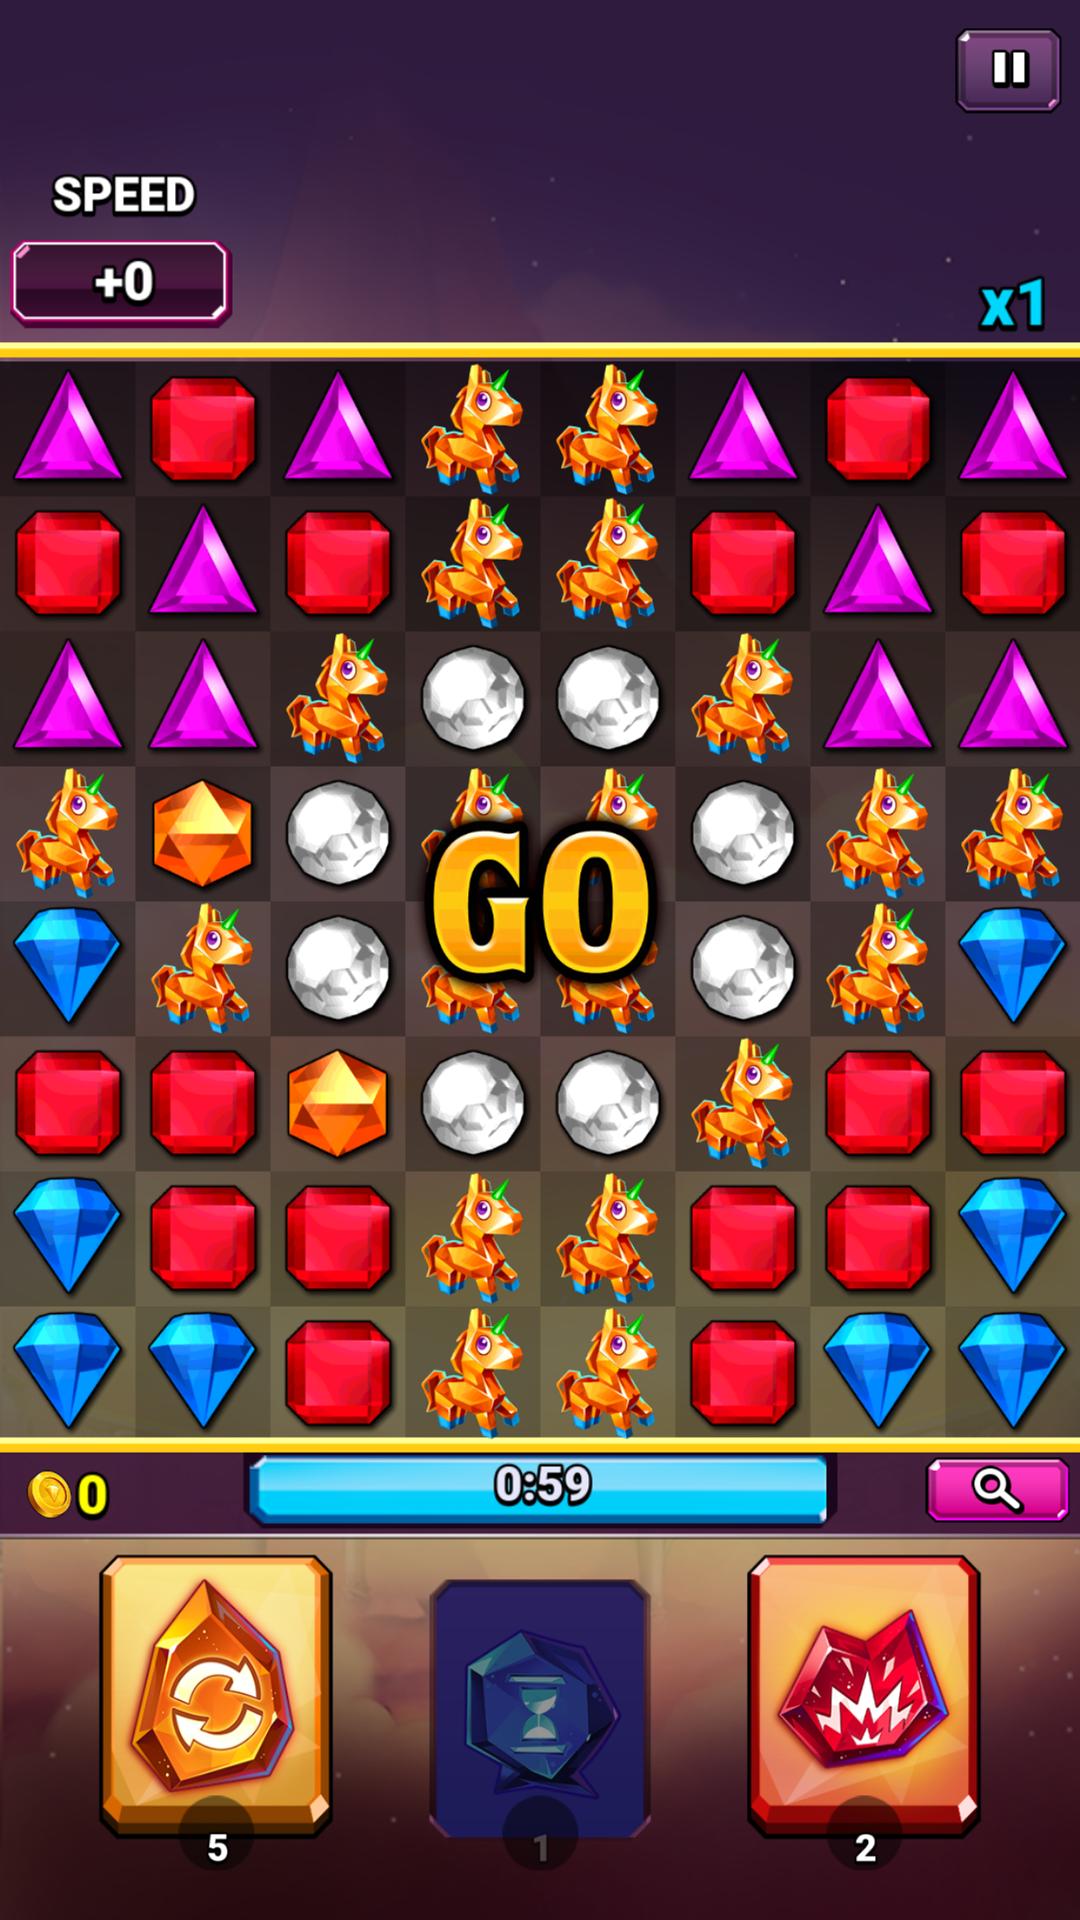 Bejeweled Blitz for Android - APK Download